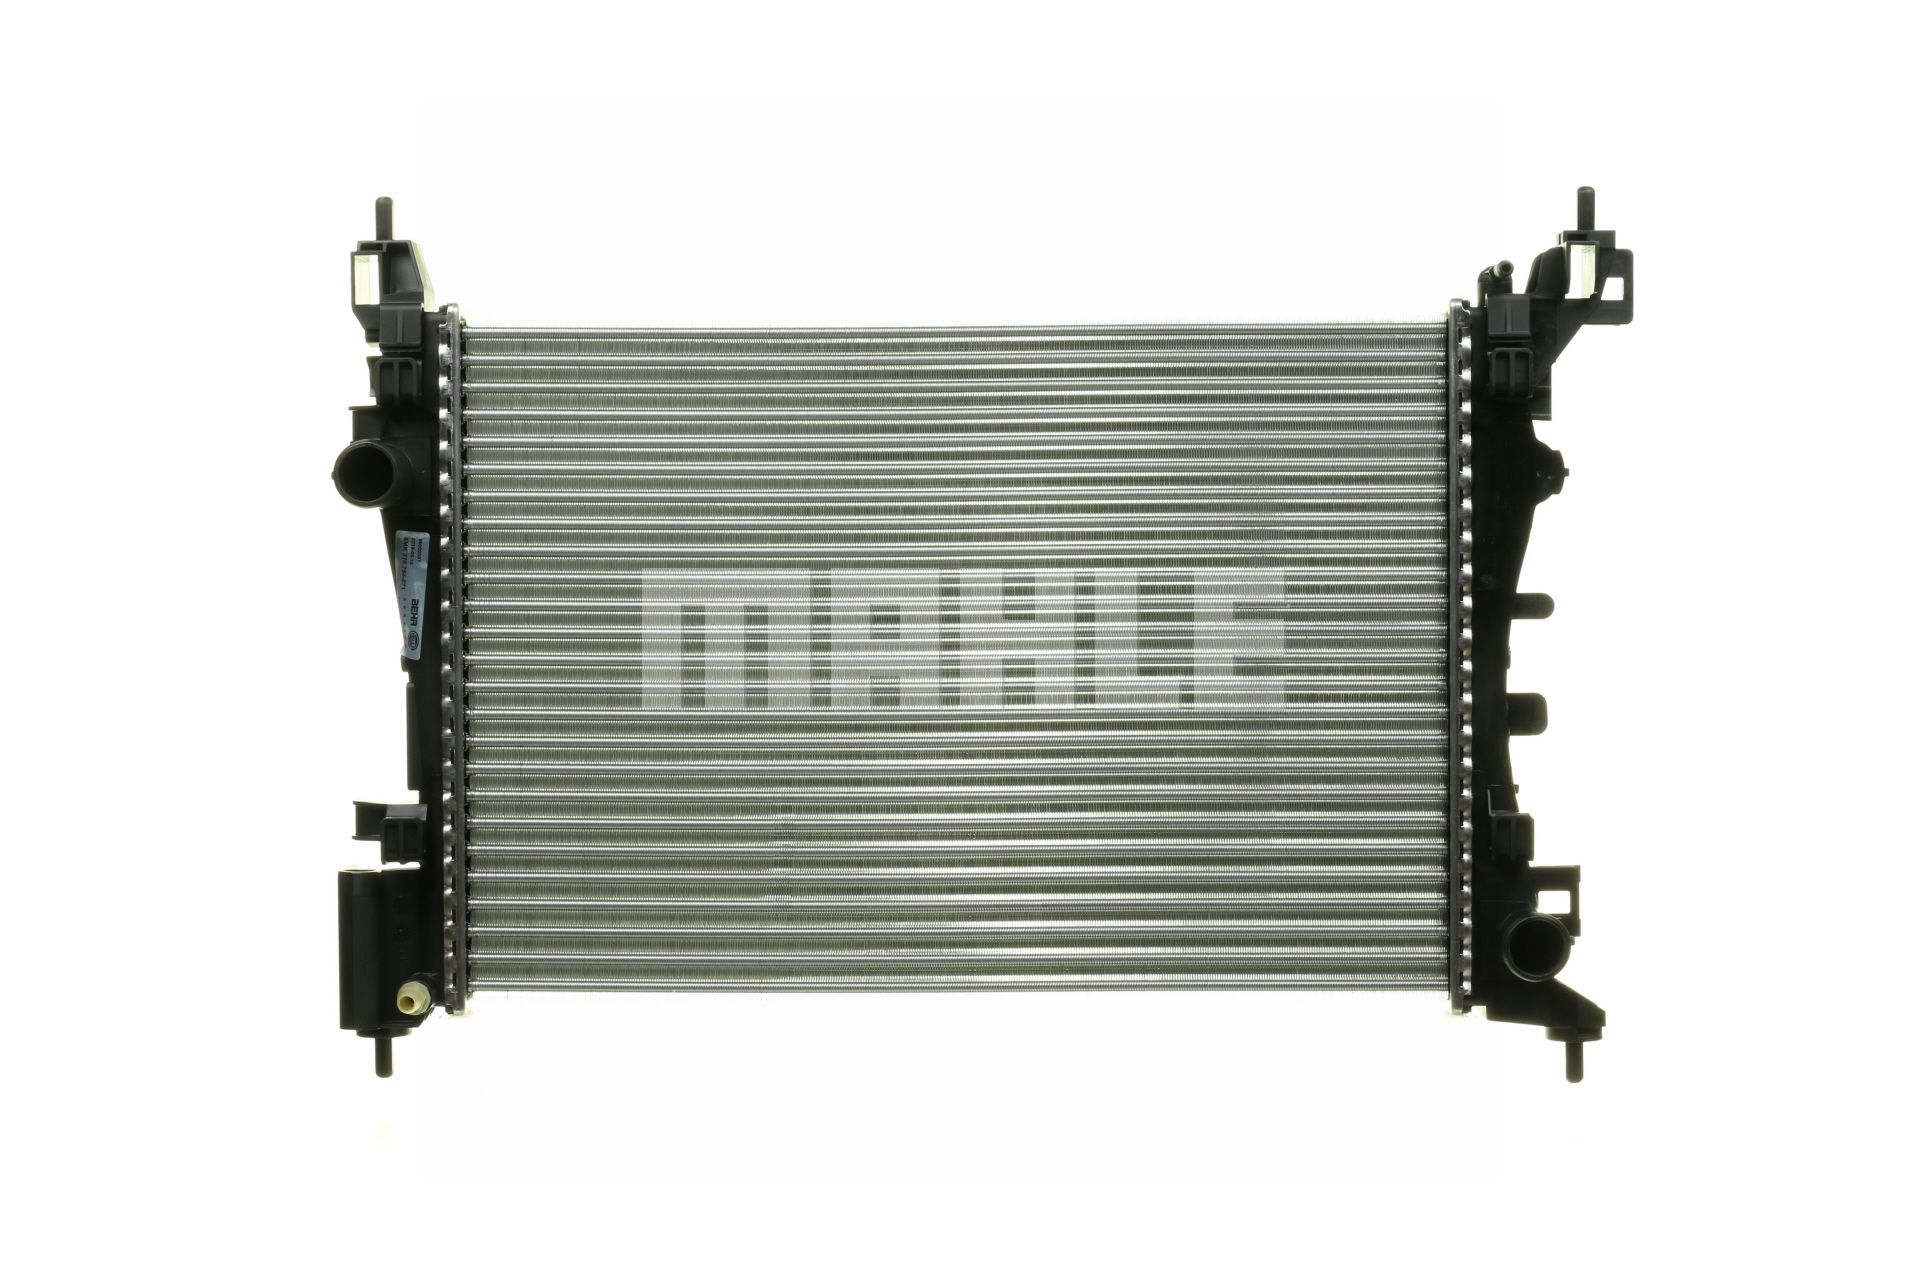 MAHLE ORIGINAL CR 1121 000P Engine radiator 540 x 375 x 26 mm, Manual Transmission, Mechanically jointed cooling fins